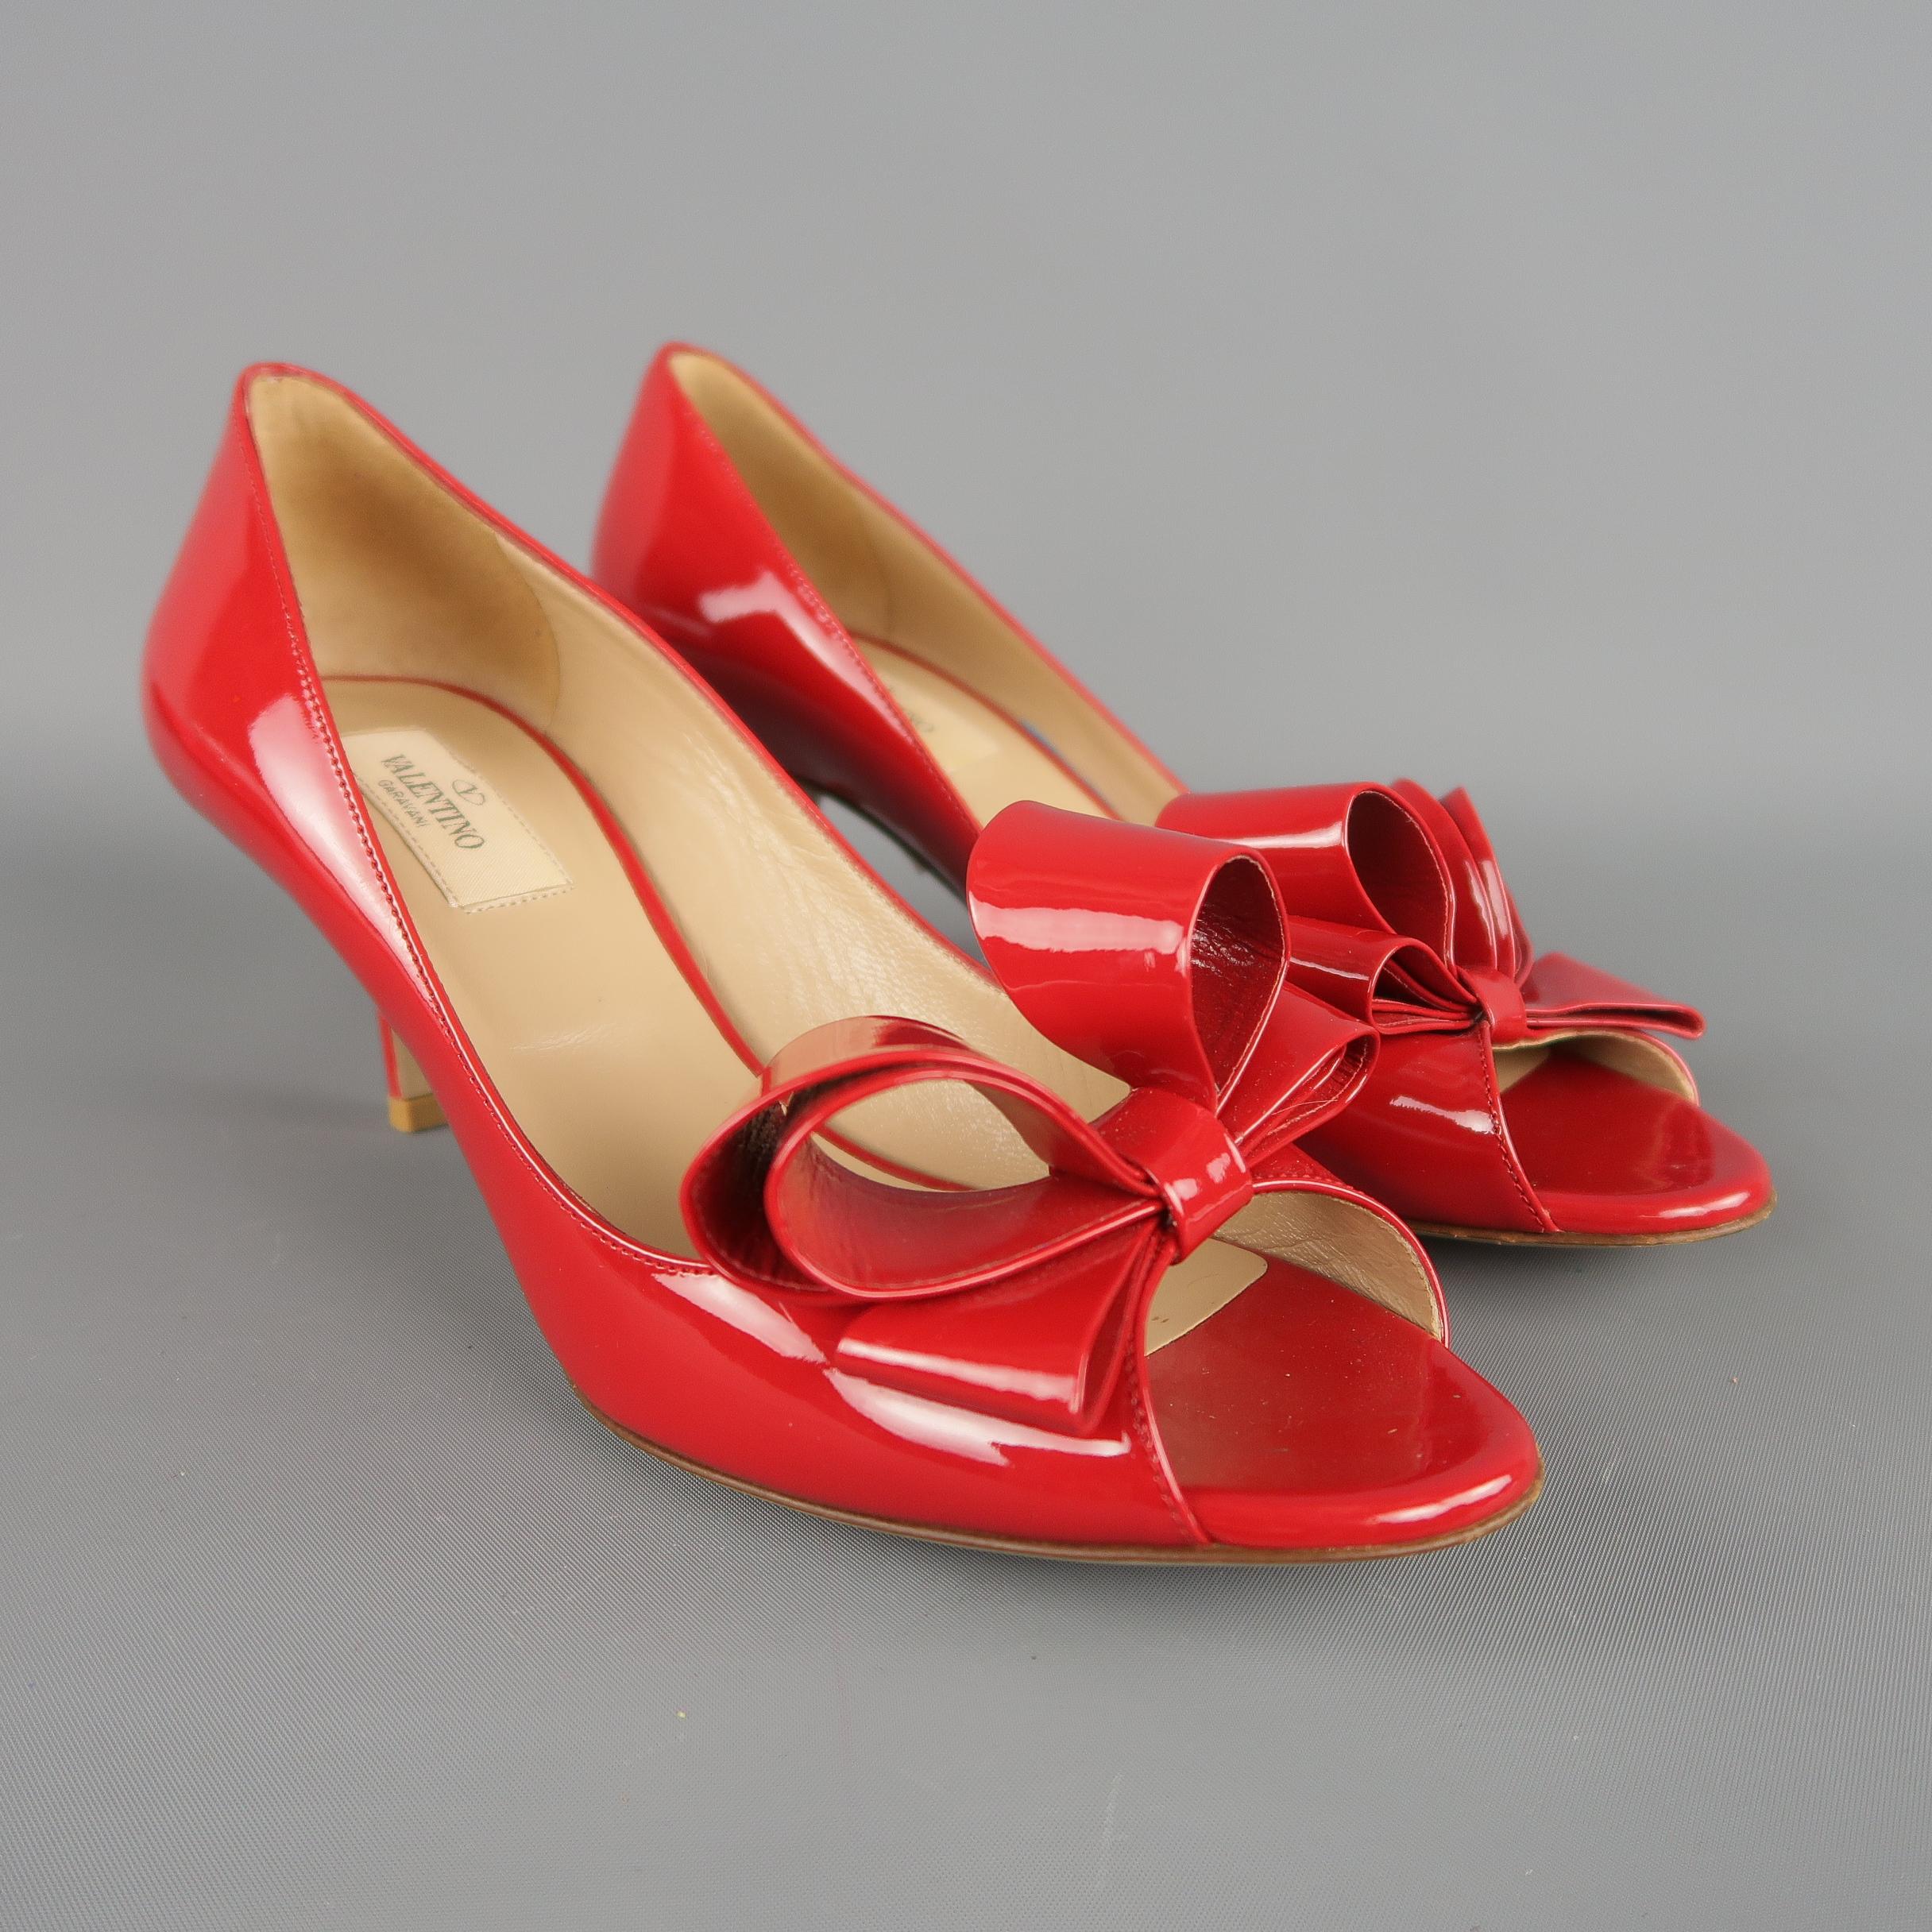 VALENTINO pumps come in red patent leather with a peep toe, low covered stiletto heel, and bow detail. Circa 2011. With Box. Made in Italy. Retail price $675,00. 
 
Excellent Pre-Owned Condition.
Marked: IT 38.5
 
Measurements:
 
Heel: 2.5 in.